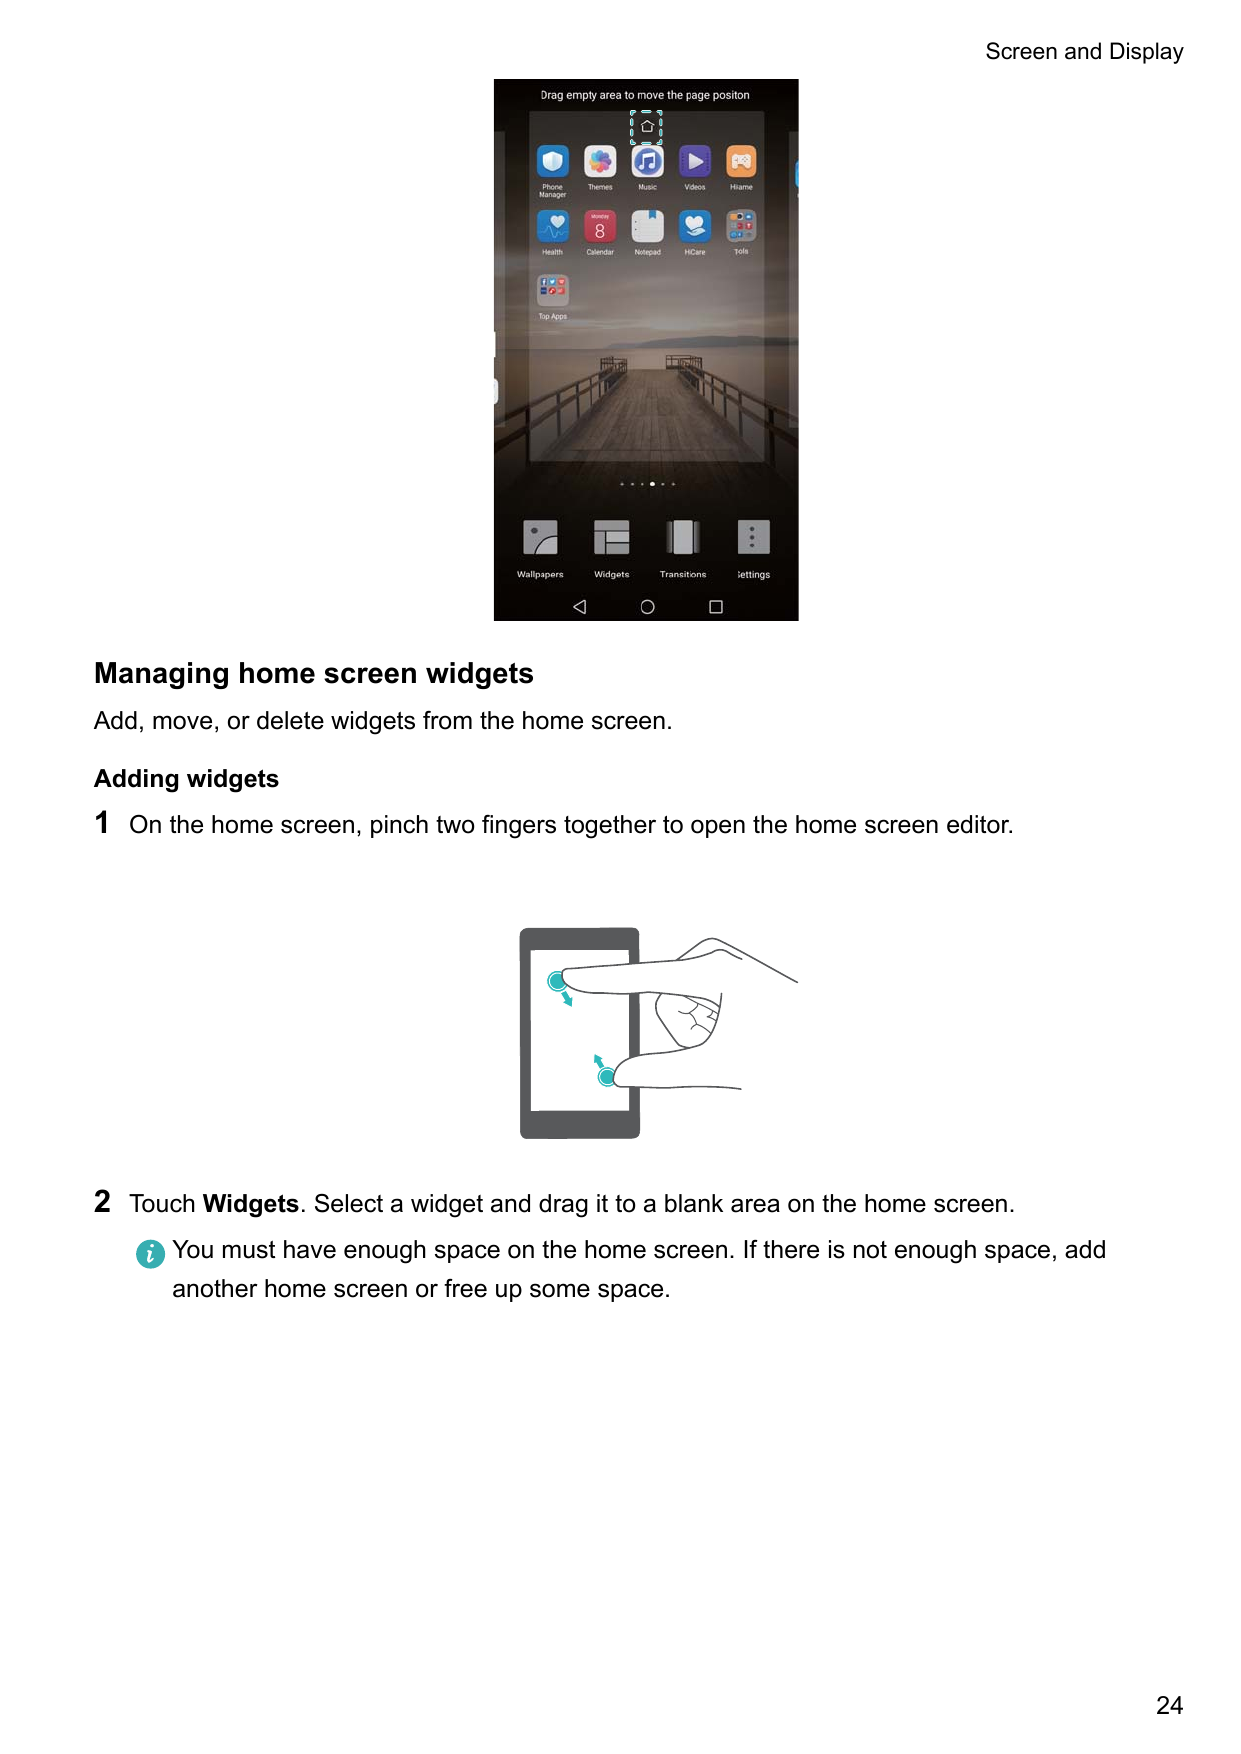 Screen and DisplayManaging home screen widgetsAdd, move, or delete widgets from the home screen.Adding widgets1On the home scree